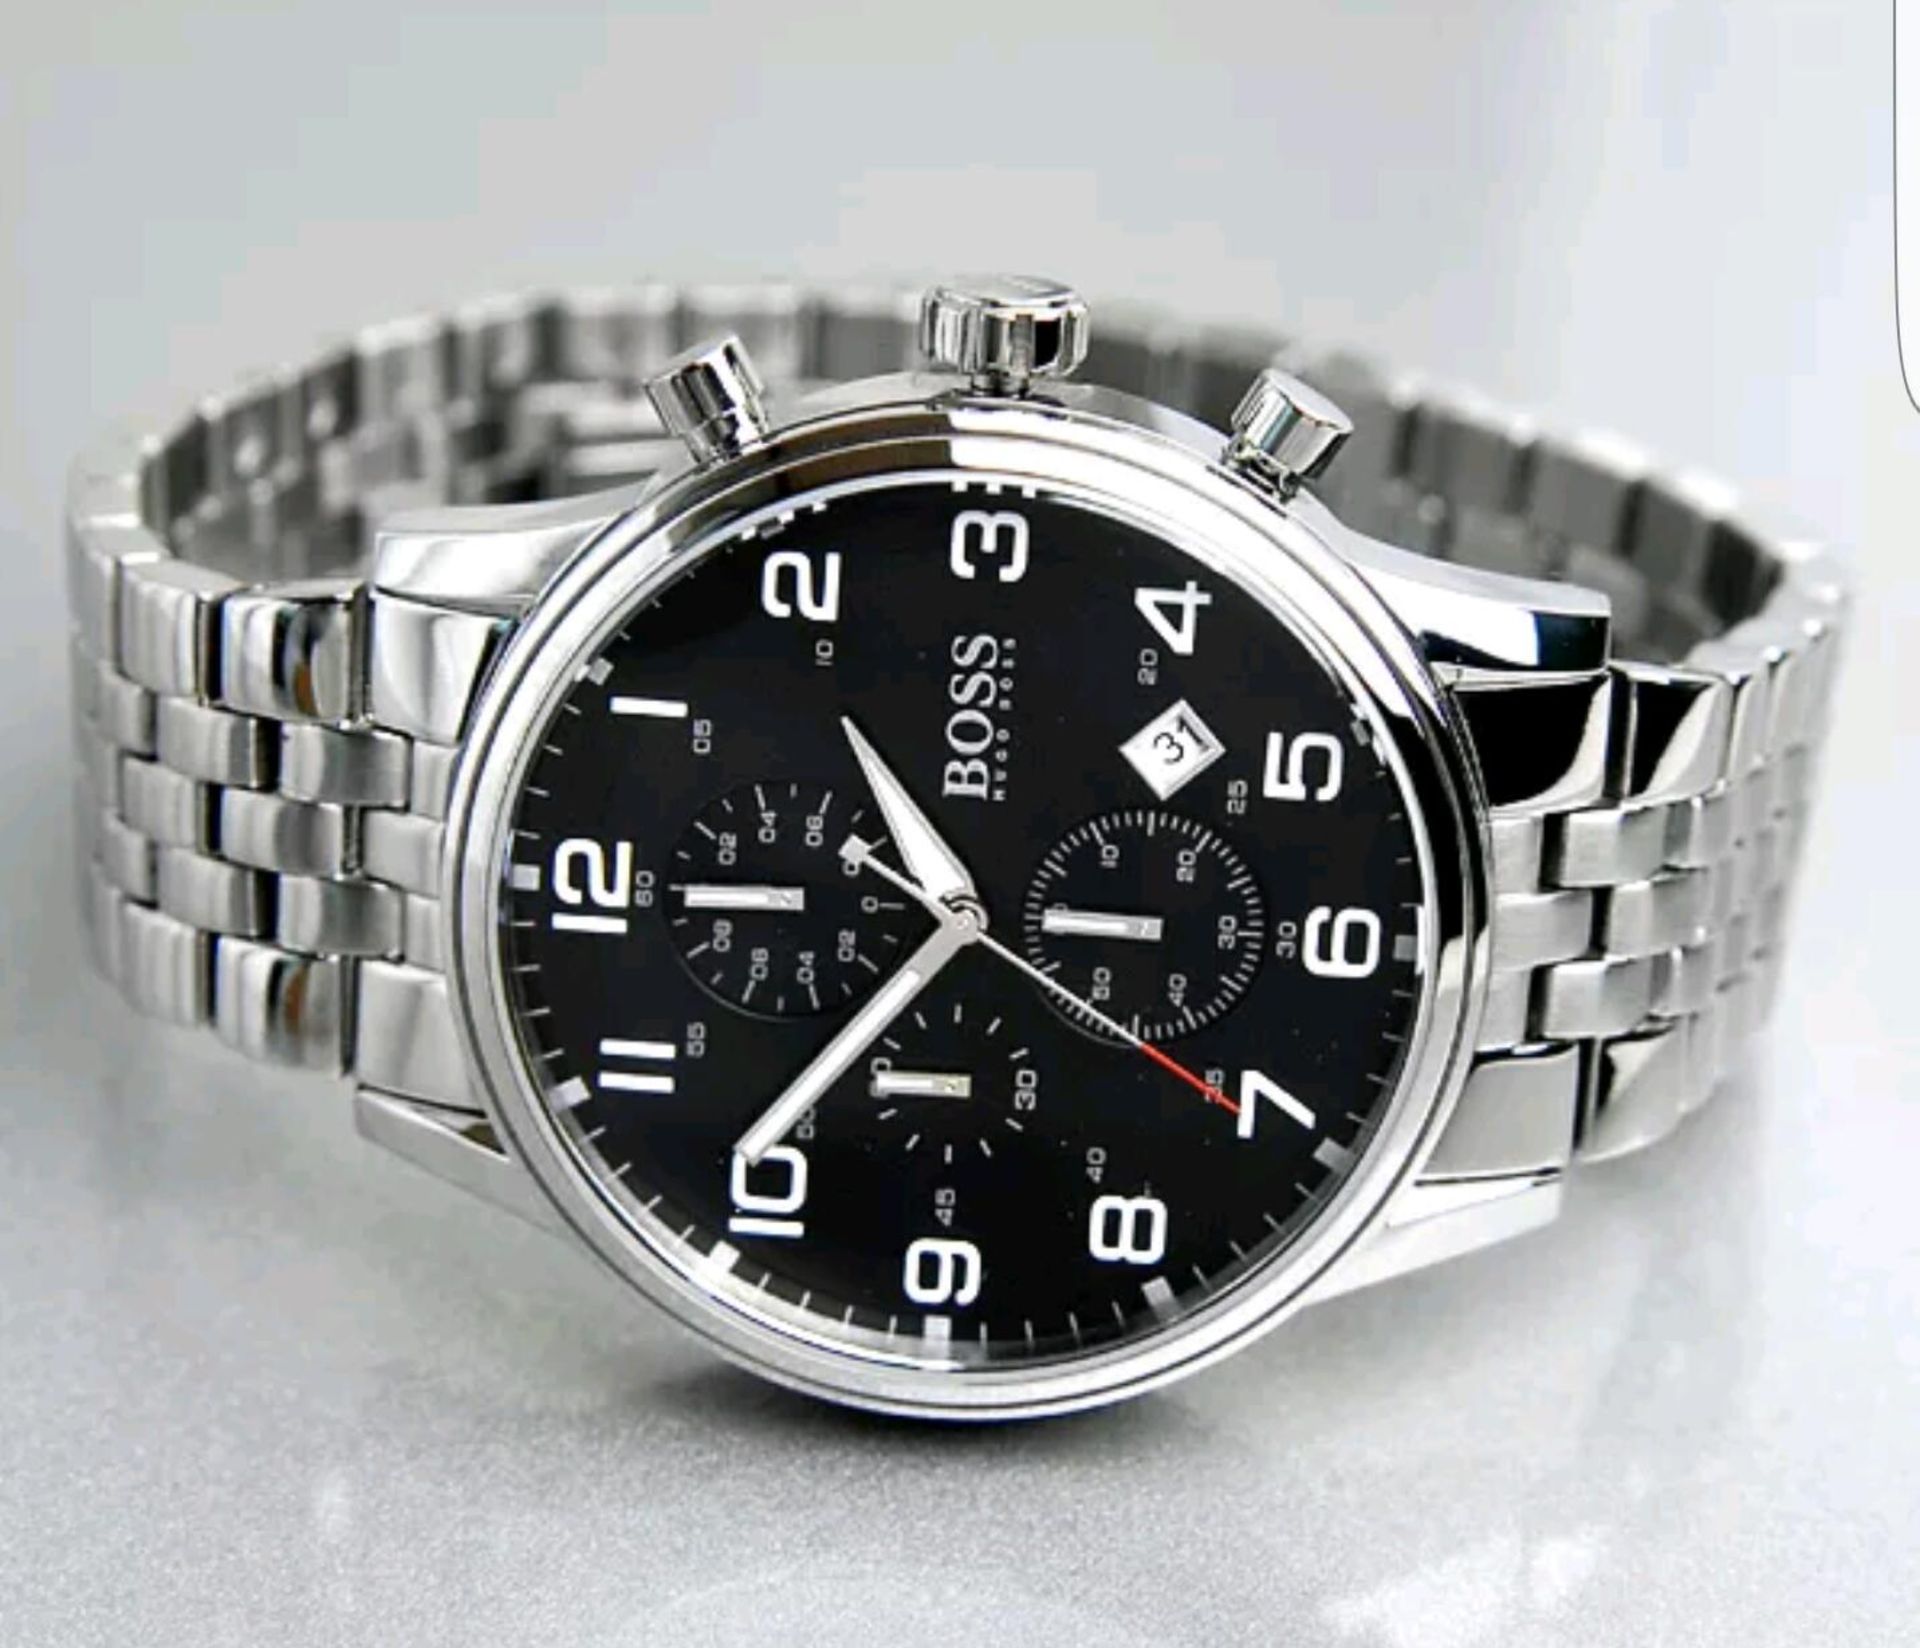 BRAND NEW HUGO BOSS 1512446, COMPLETE WITH ORIGINAL BOX AND MANUAL - Image 2 of 2